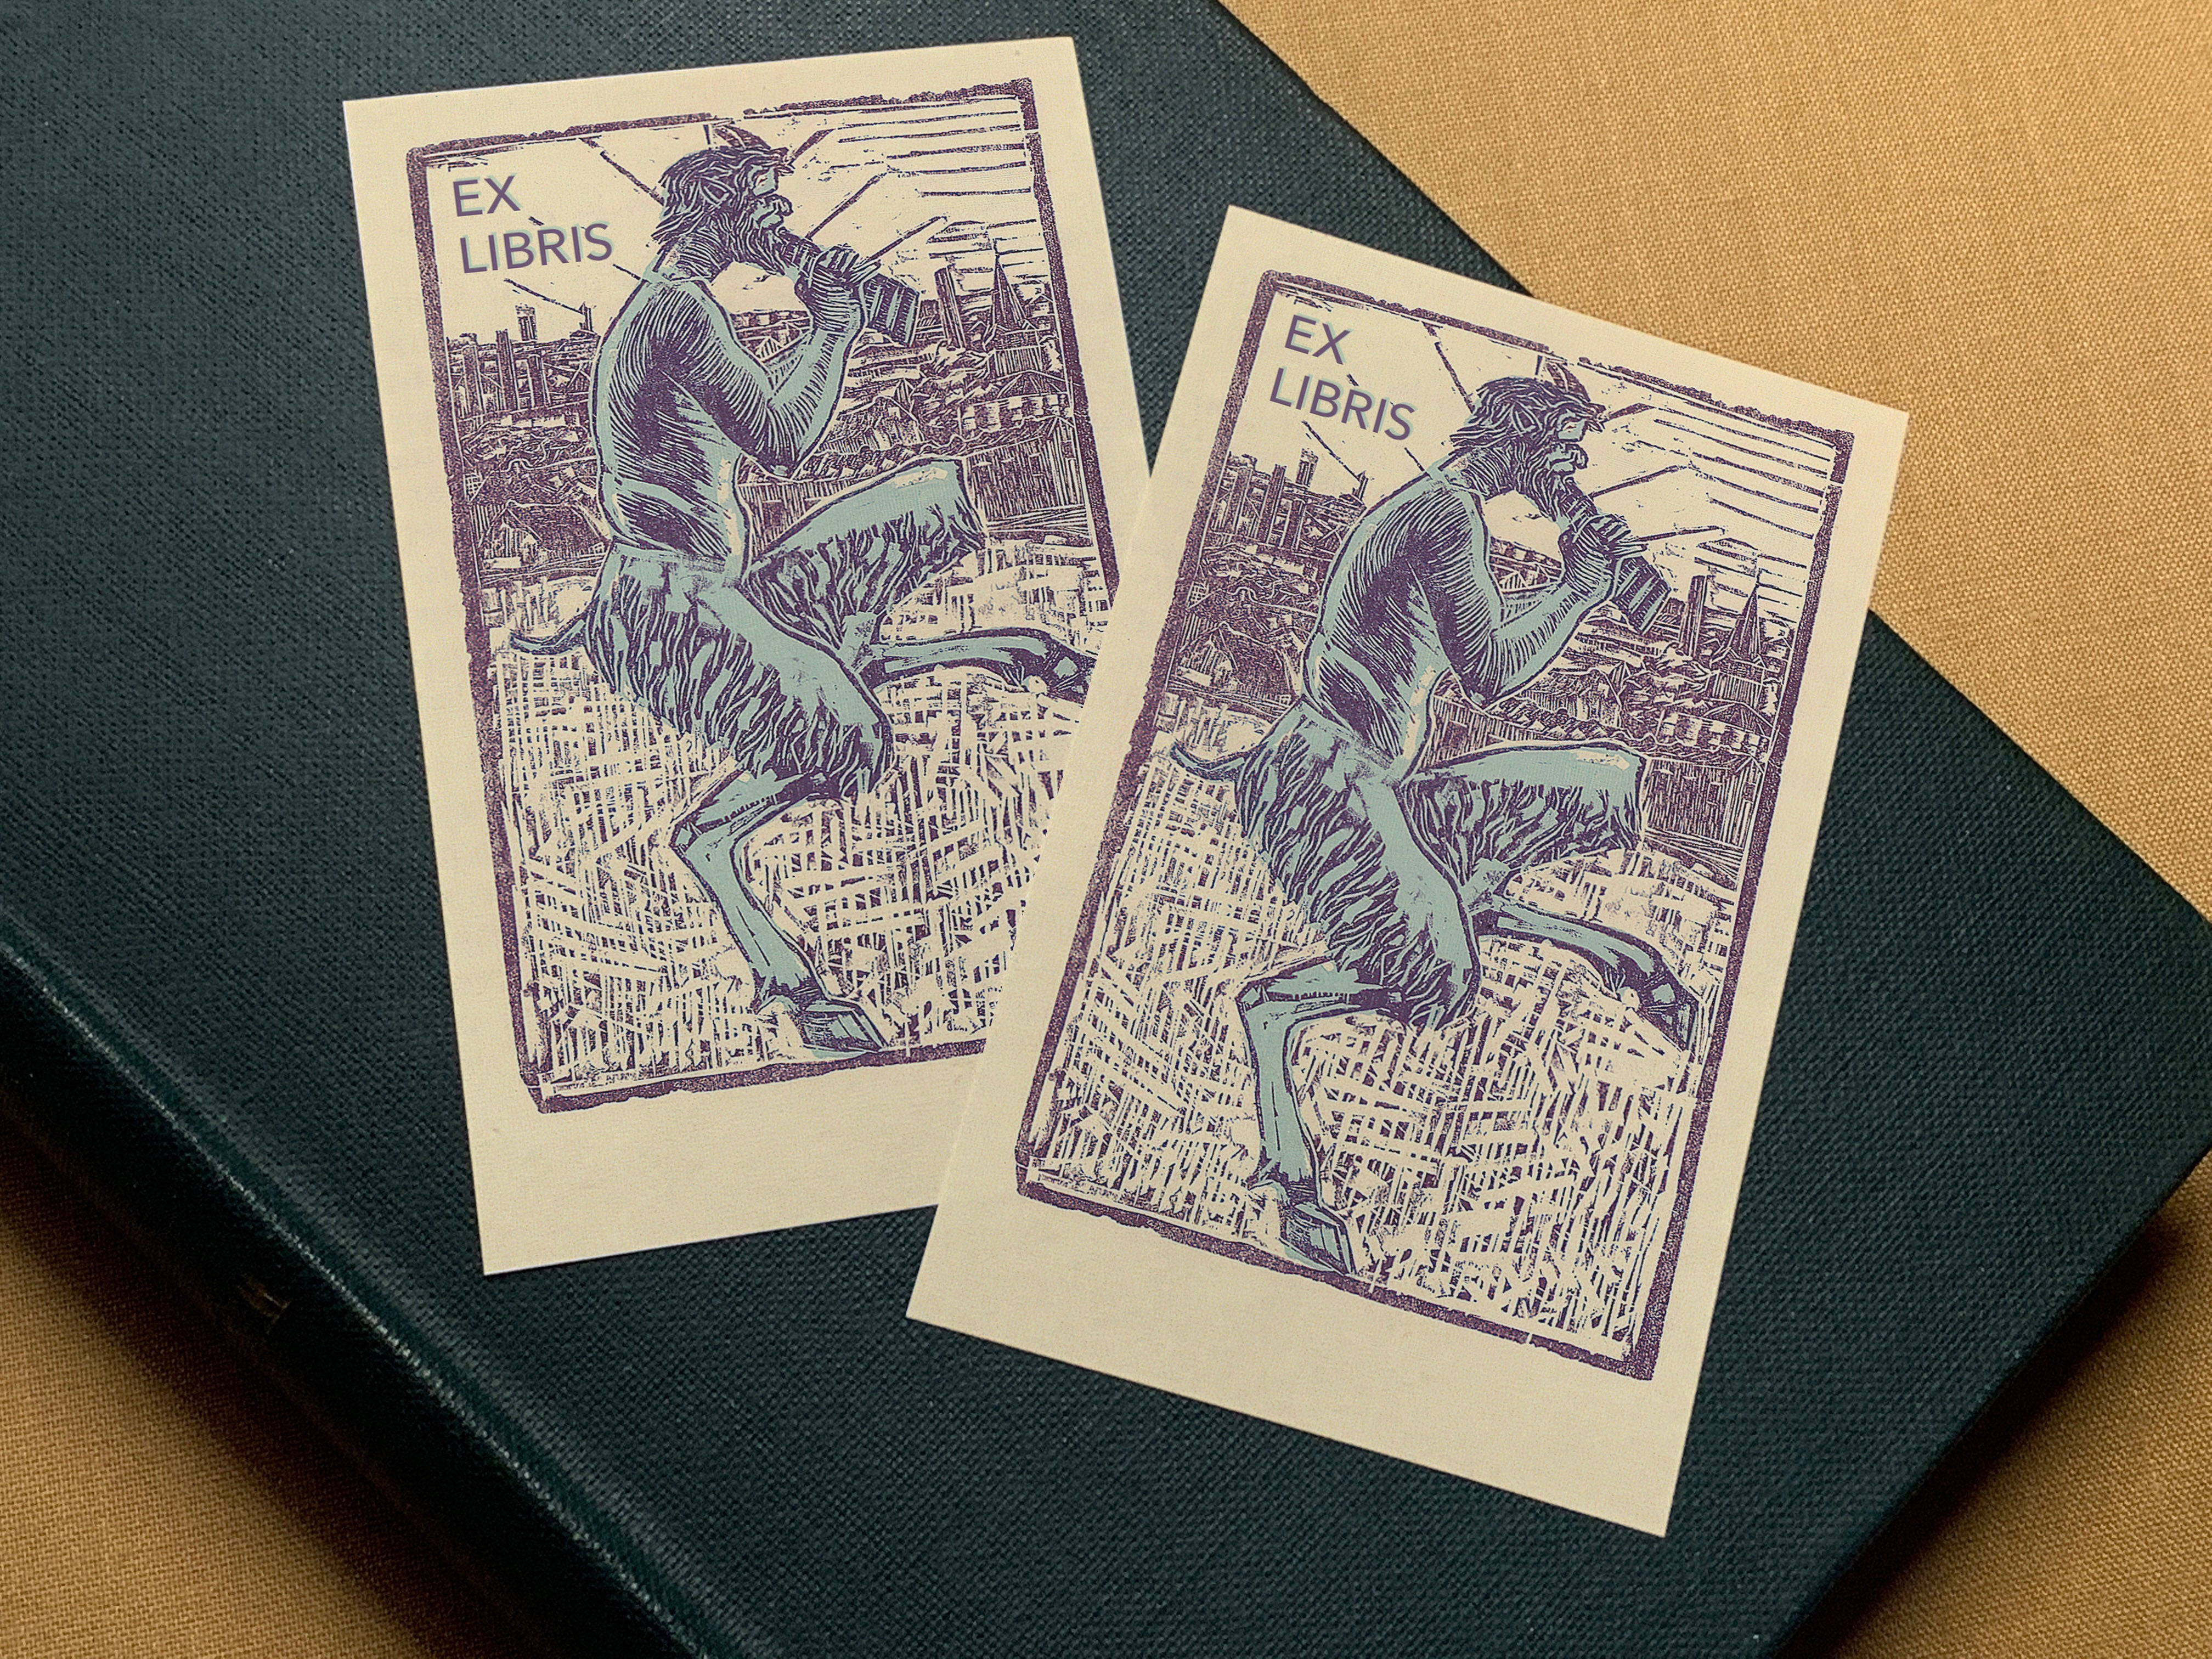 Pan by Josef Cantre, Personalized Ex-Libris Bookplates, Crafted on Traditional Gummed Paper, 2.5in x 4in, Set of 30